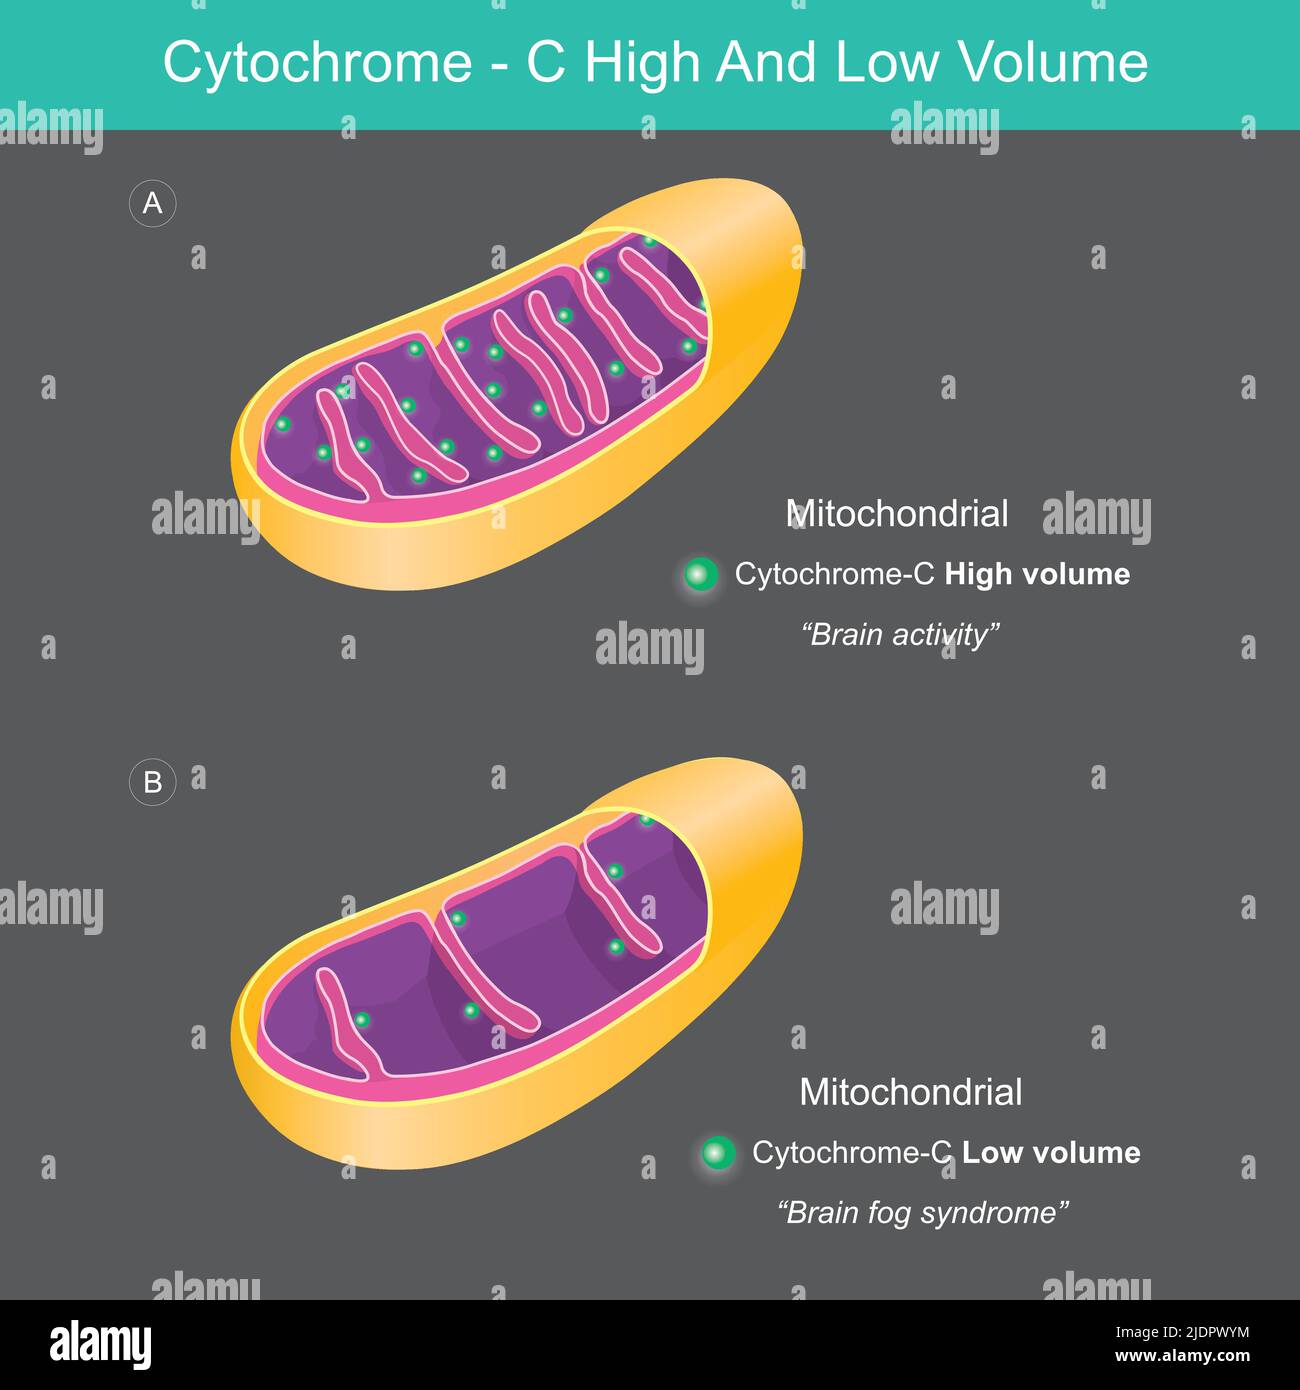 Cytochrome High And Low Volume. The different cytochrome C high and low volume in mitochondrial illustration. Stock Vector